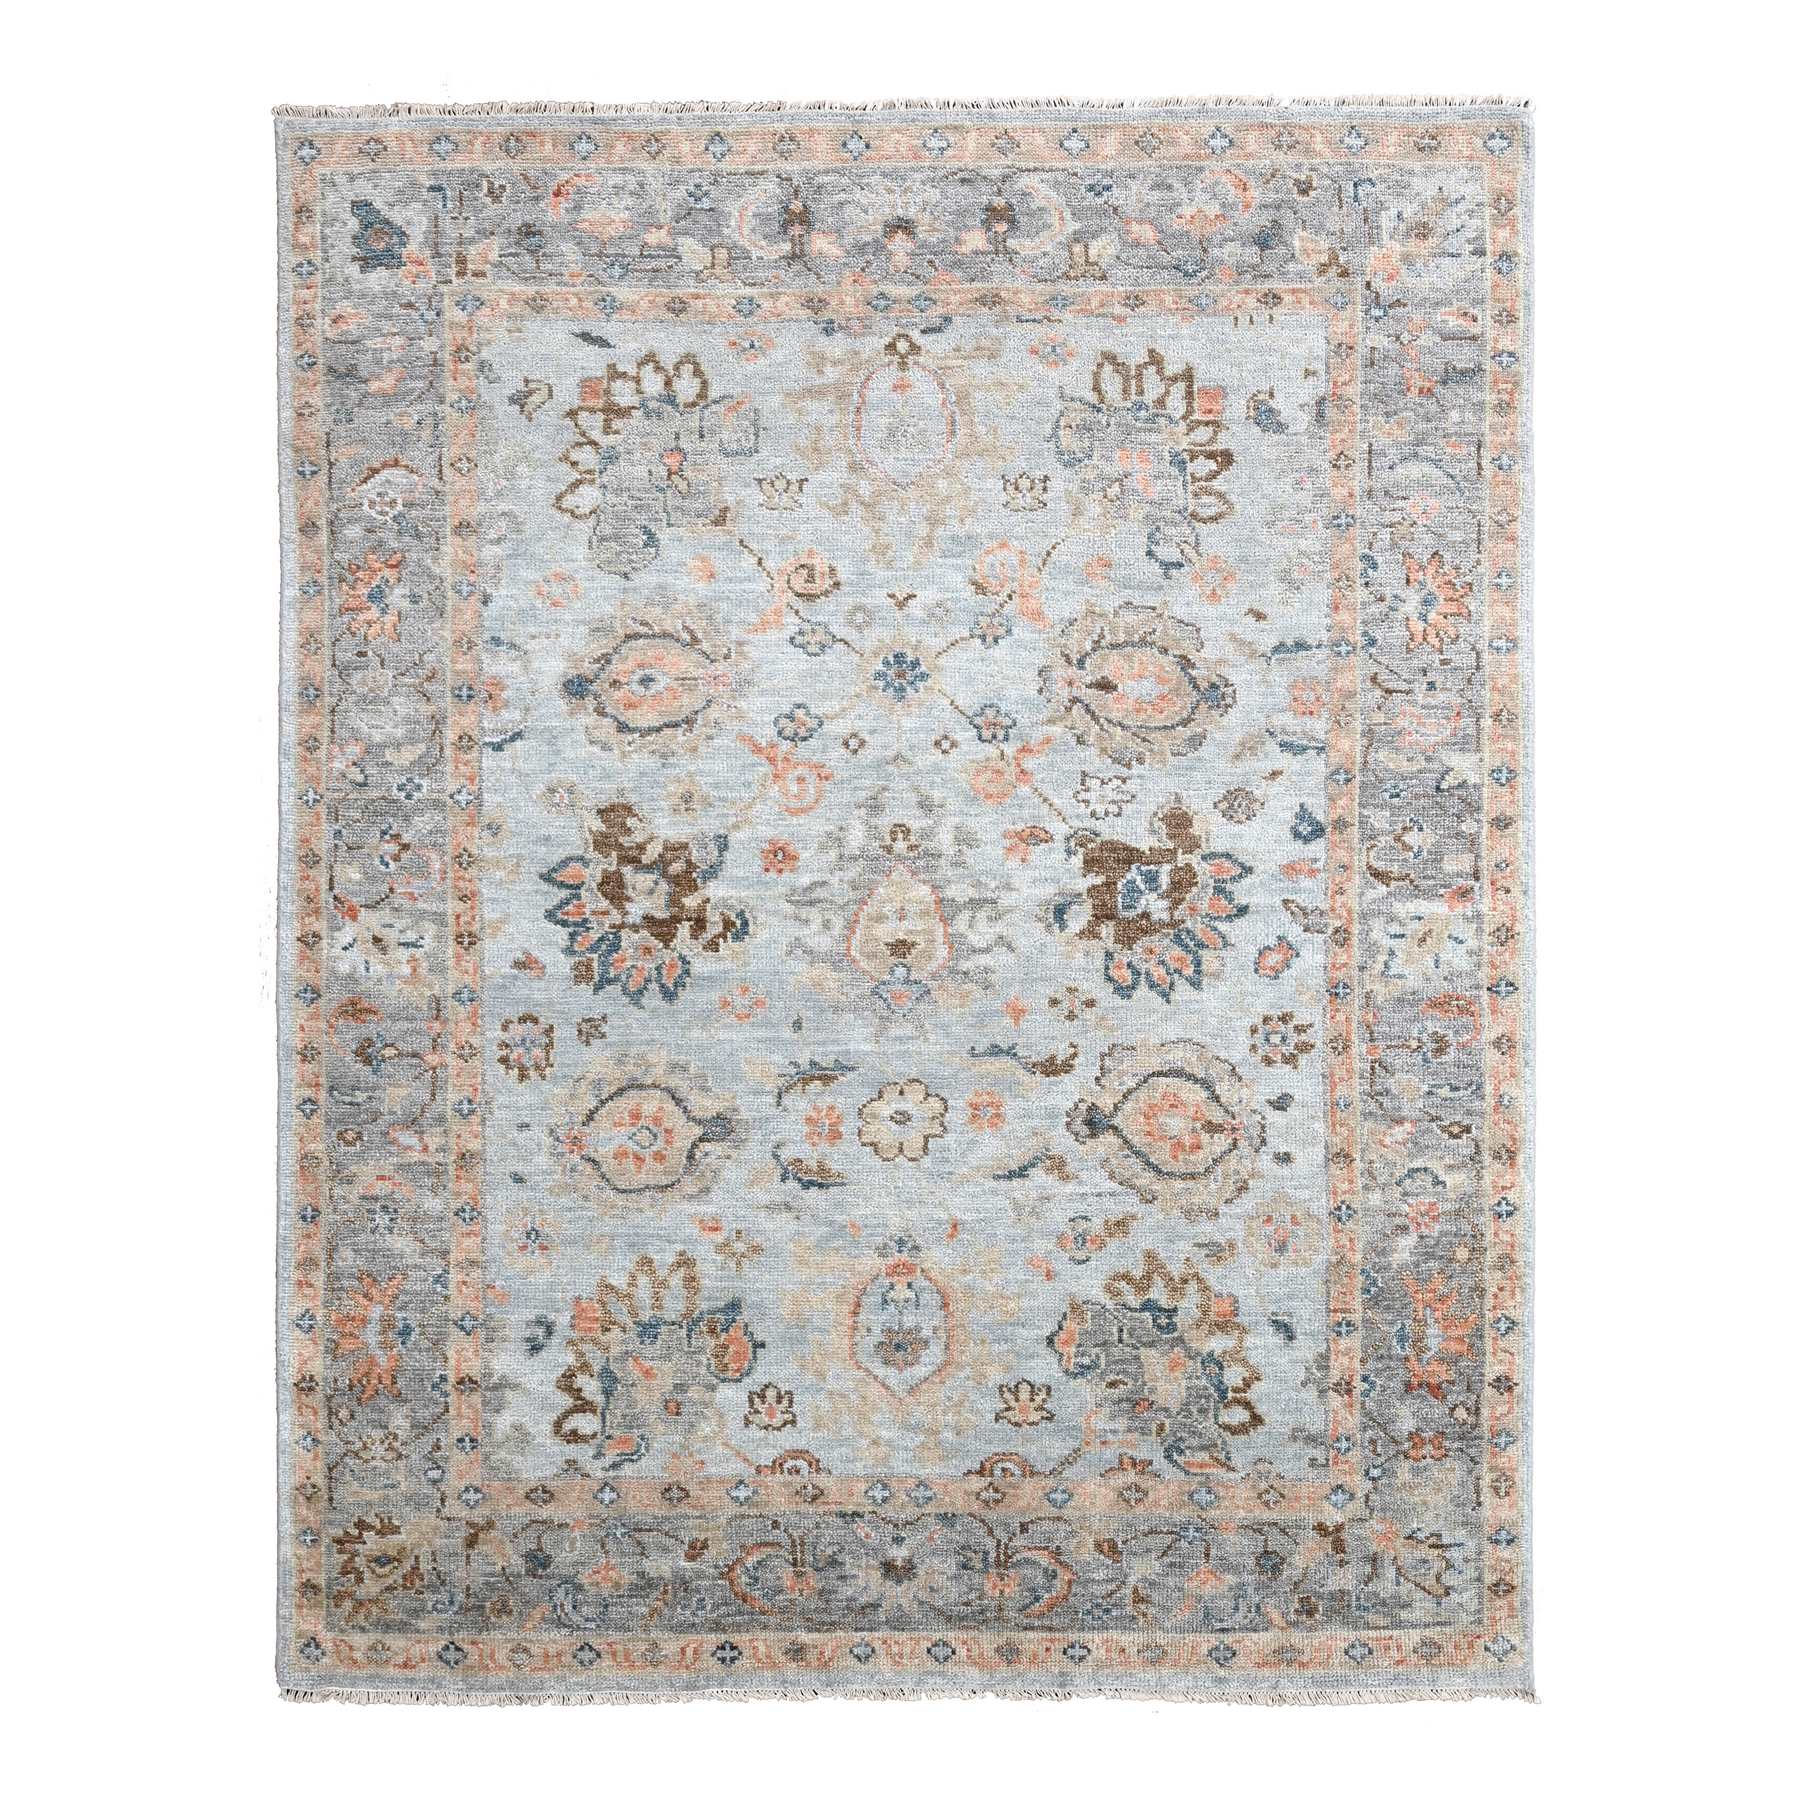 Brittany Blue and Parma Gray, Plush and Lush Soft Pile, Hand Knotted Oushak Inspired Tone On Tone, Natural Wool, Supple Collection, Oriental Rug